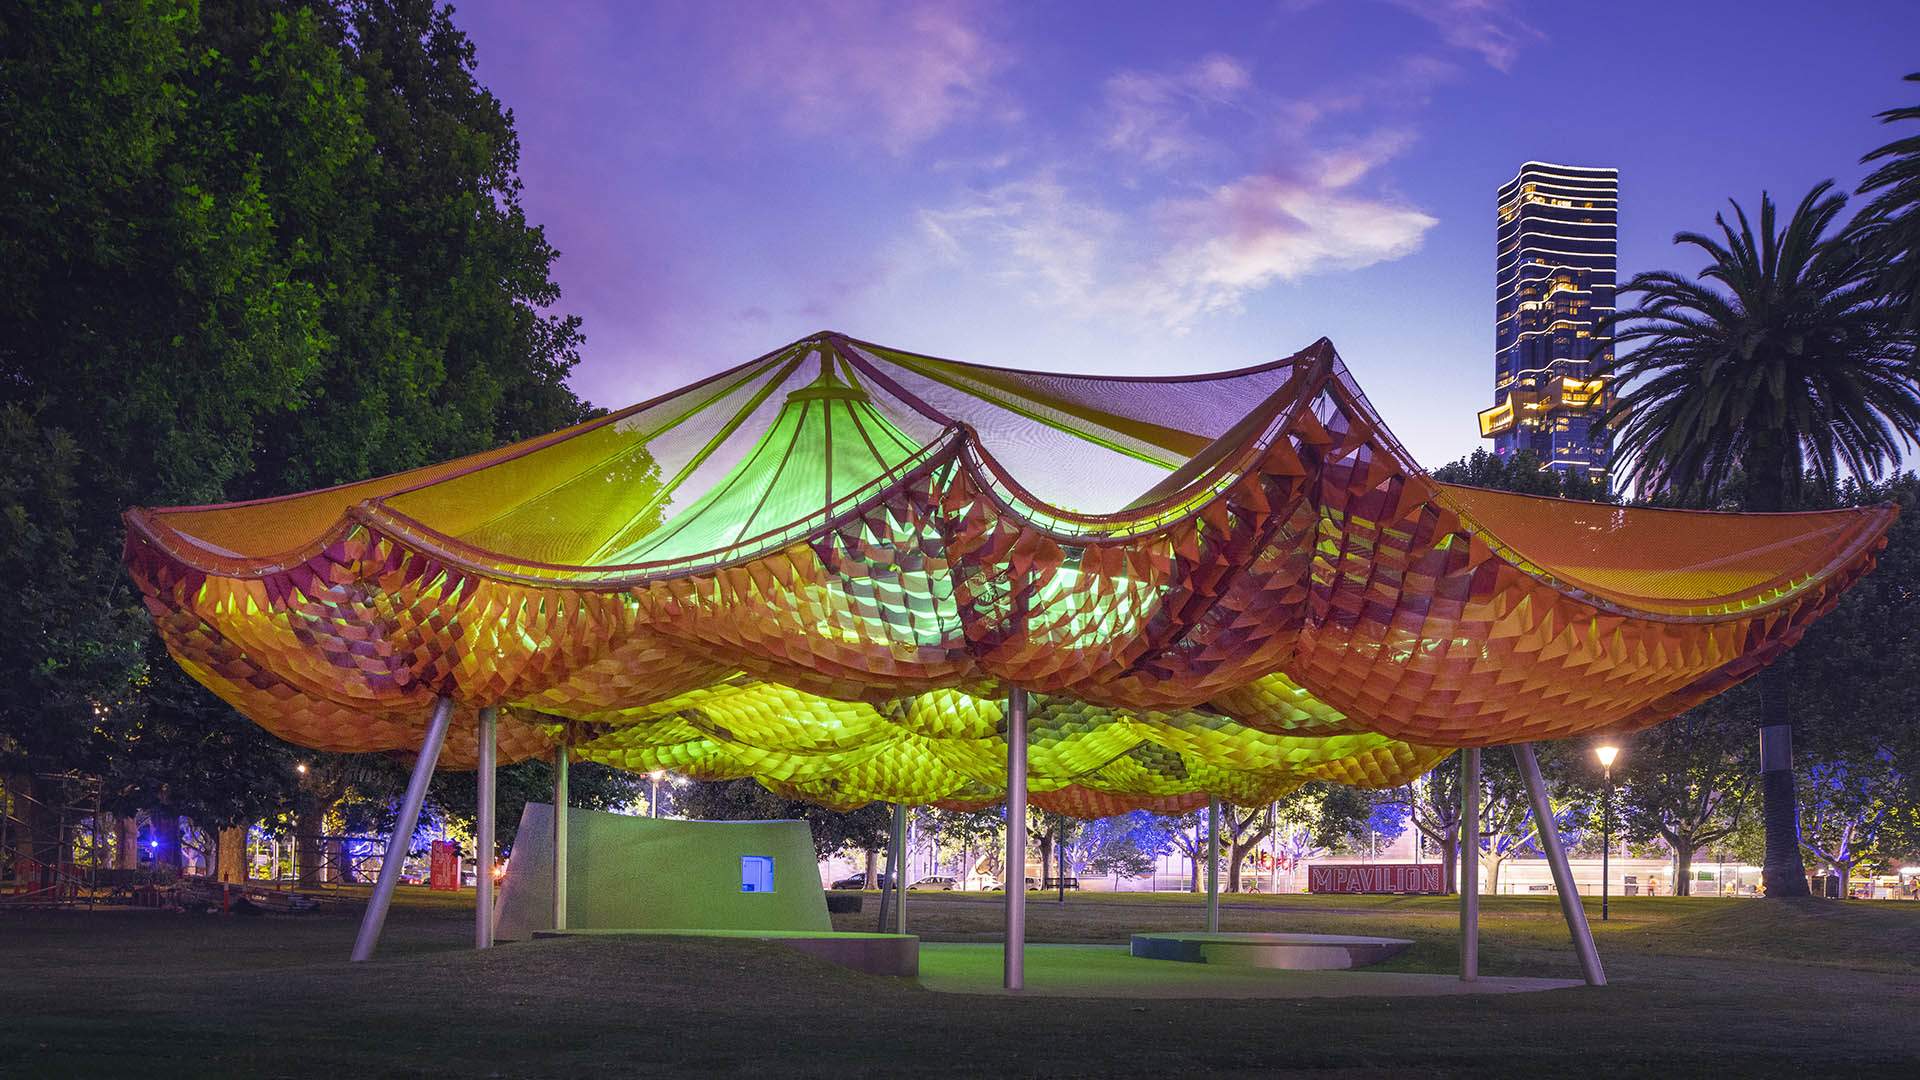 MPavilion Is Back for Another Summer and Autumn Filled with 250-Plus Free Arts and Design Events